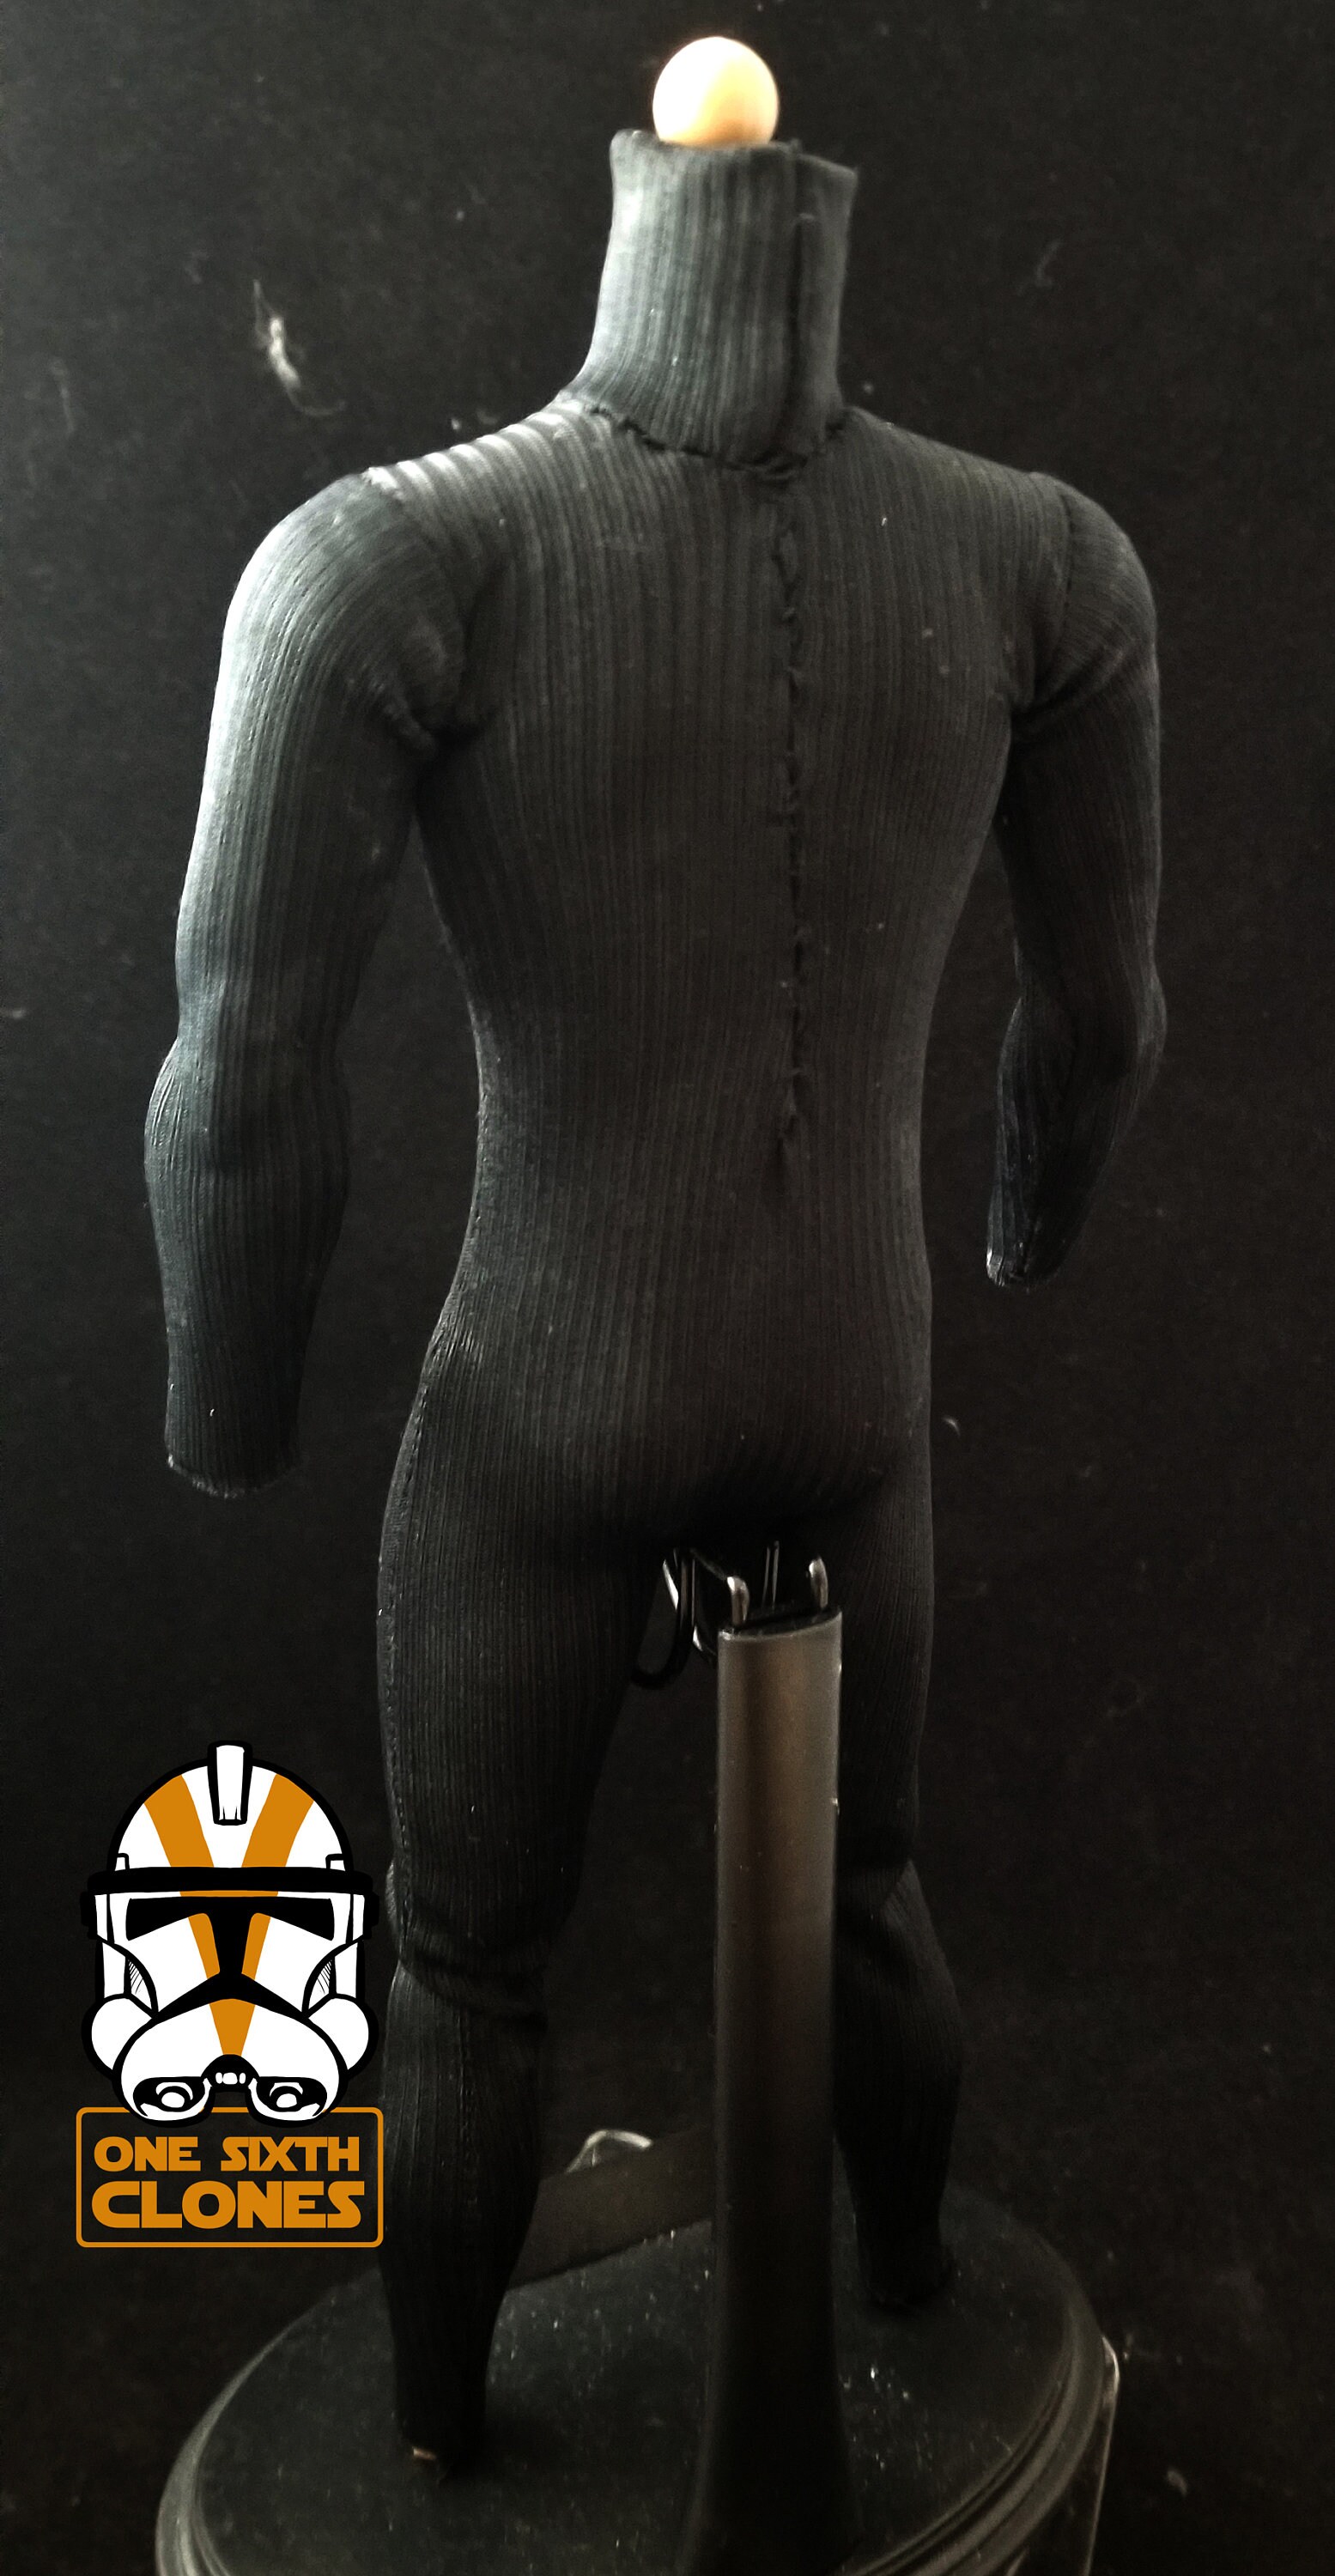 Star wars 1/6 Underbody Suit nonRibbed Custom Made For Clone Troopers 